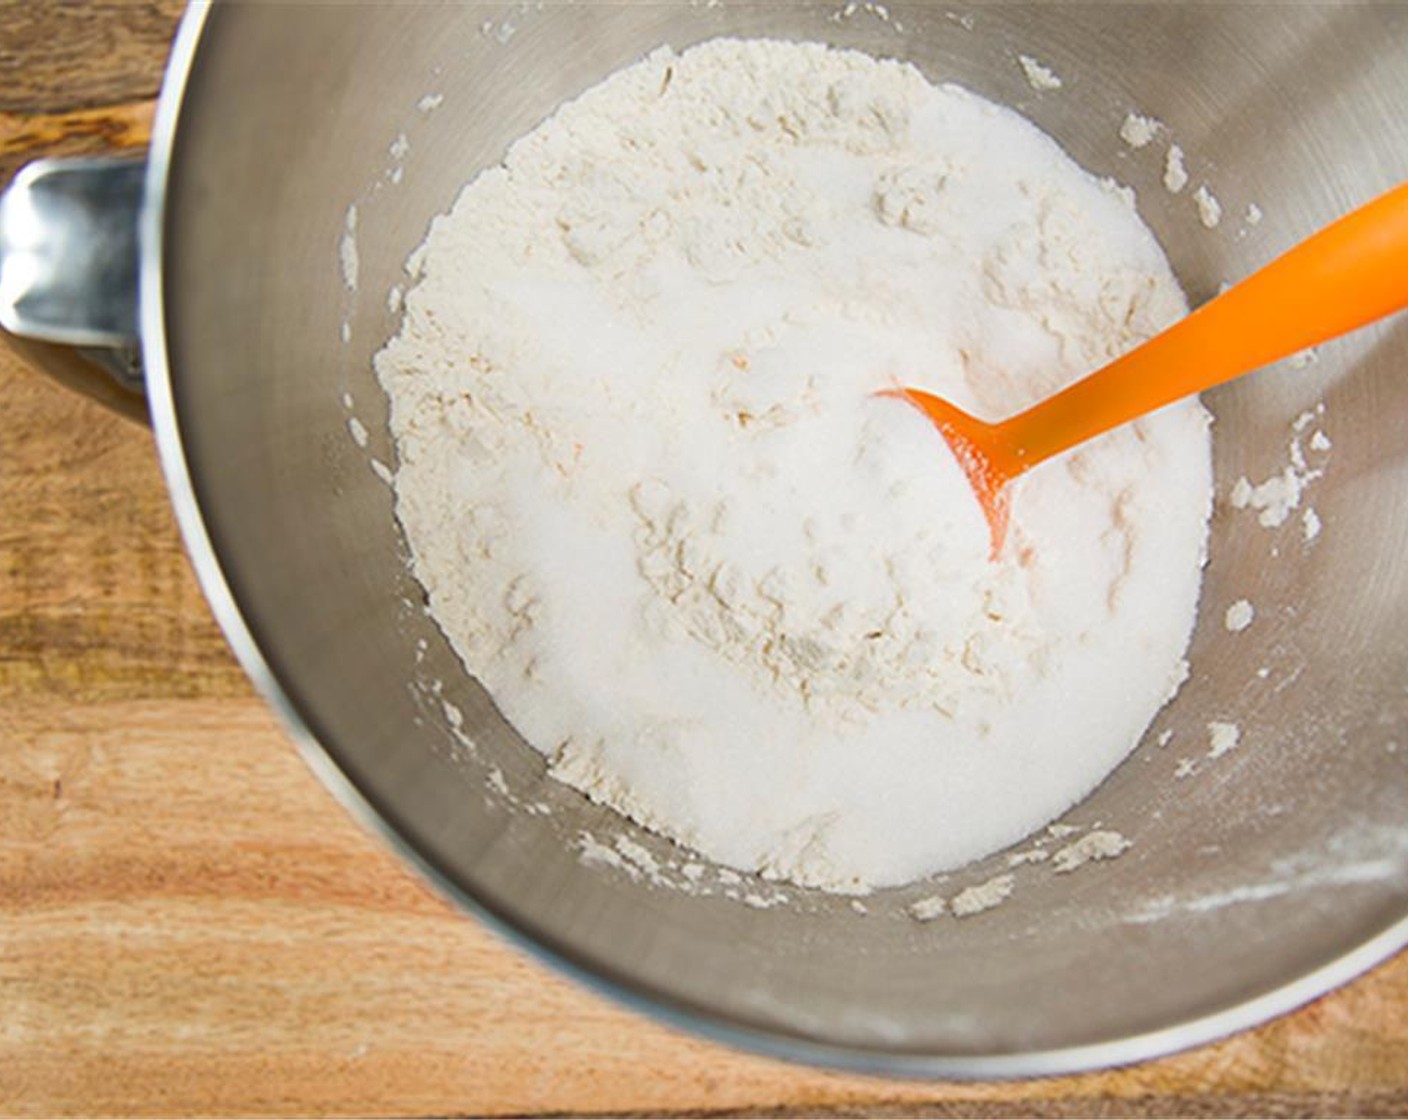 step 3 In a large bowl sift together All-Purpose Flour (2 cups), Salt (1/2 tsp) and Baking Powder (1 Tbsp). When dry ingredients are sifted, add Granulated Sugar (1 1/2 cups) and mix.